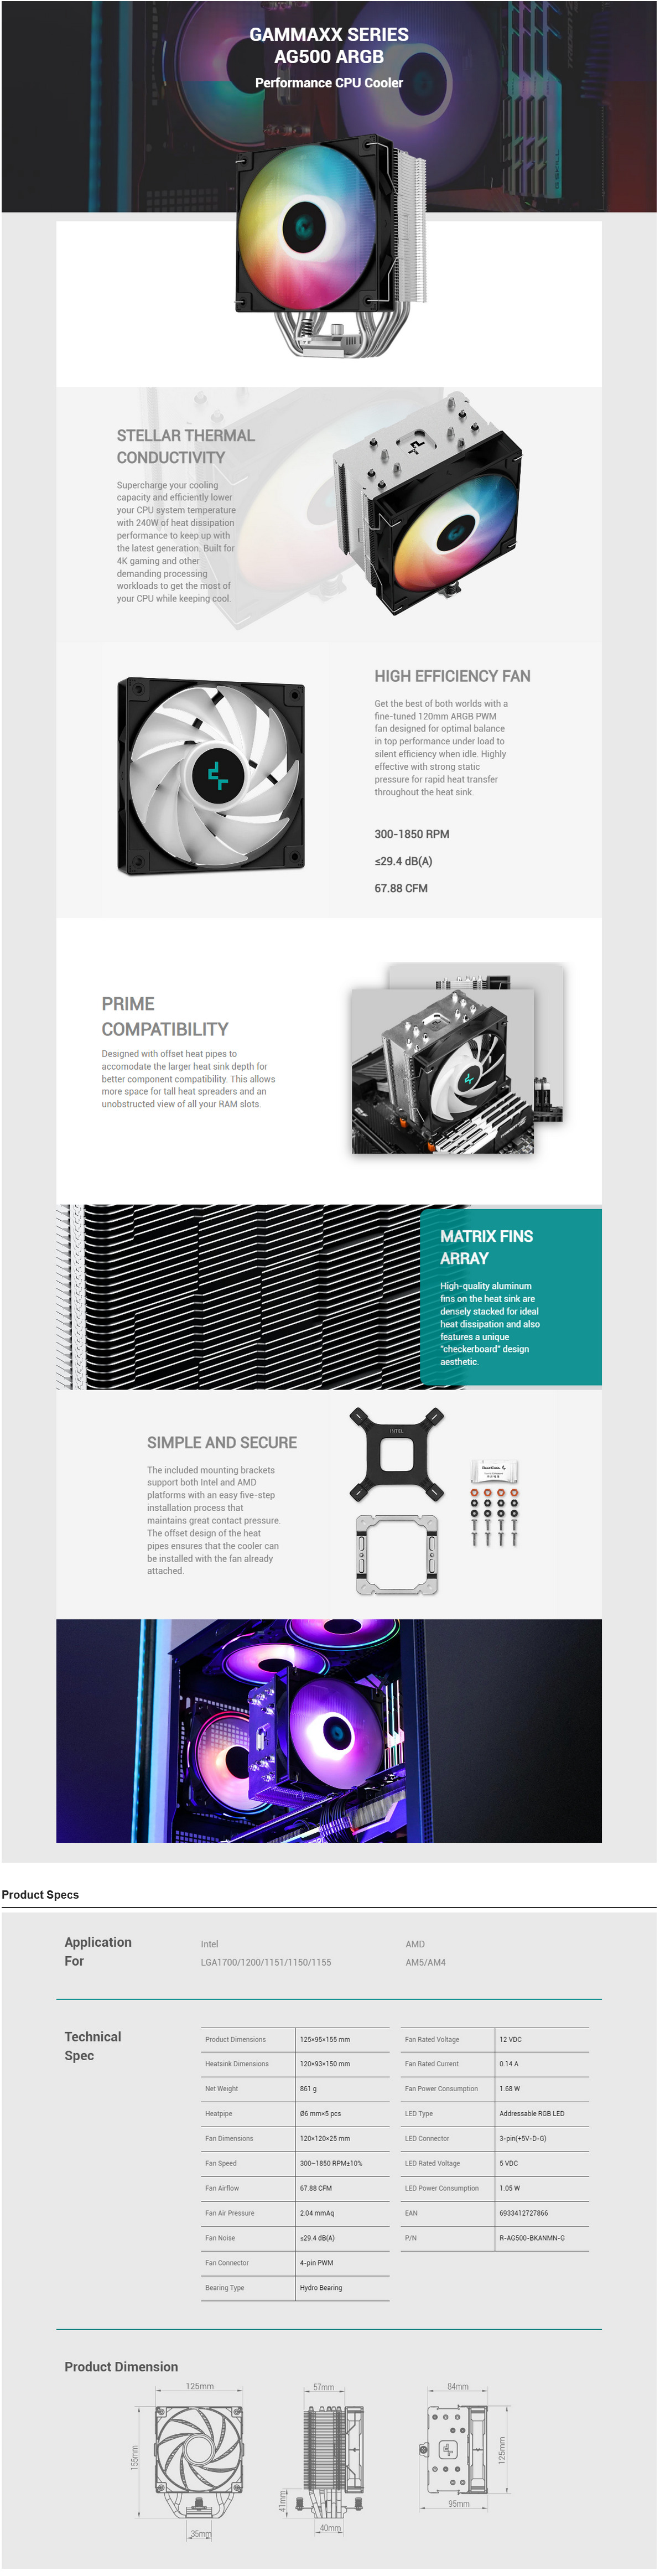 A large marketing image providing additional information about the product DeepCool AG500 ARGB CPU Cooler - Additional alt info not provided